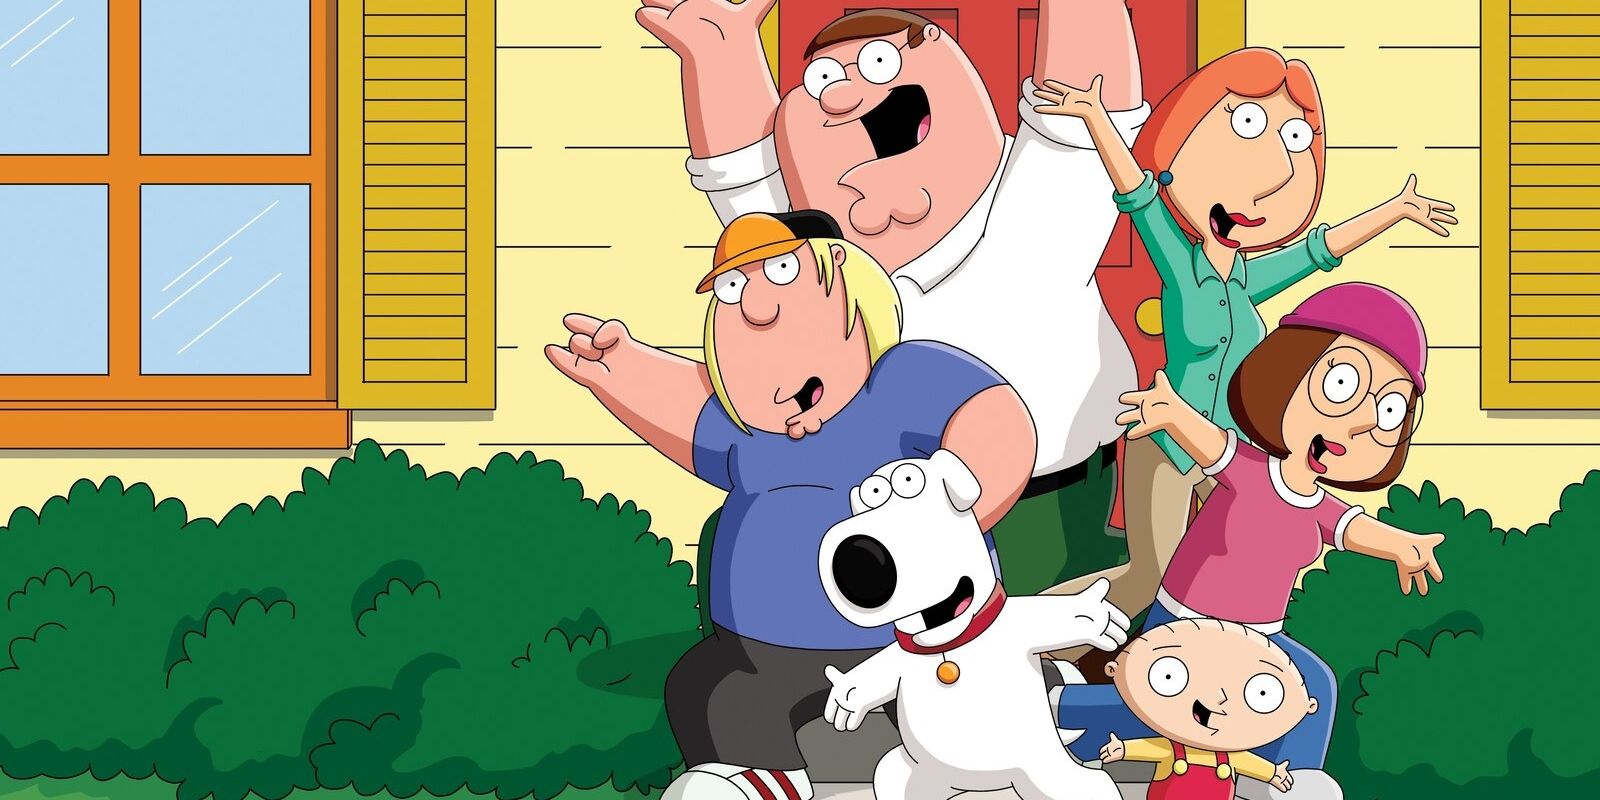 Family Guy 5 Things It Copied From The Simpsons (& 5 That Set It Apart)